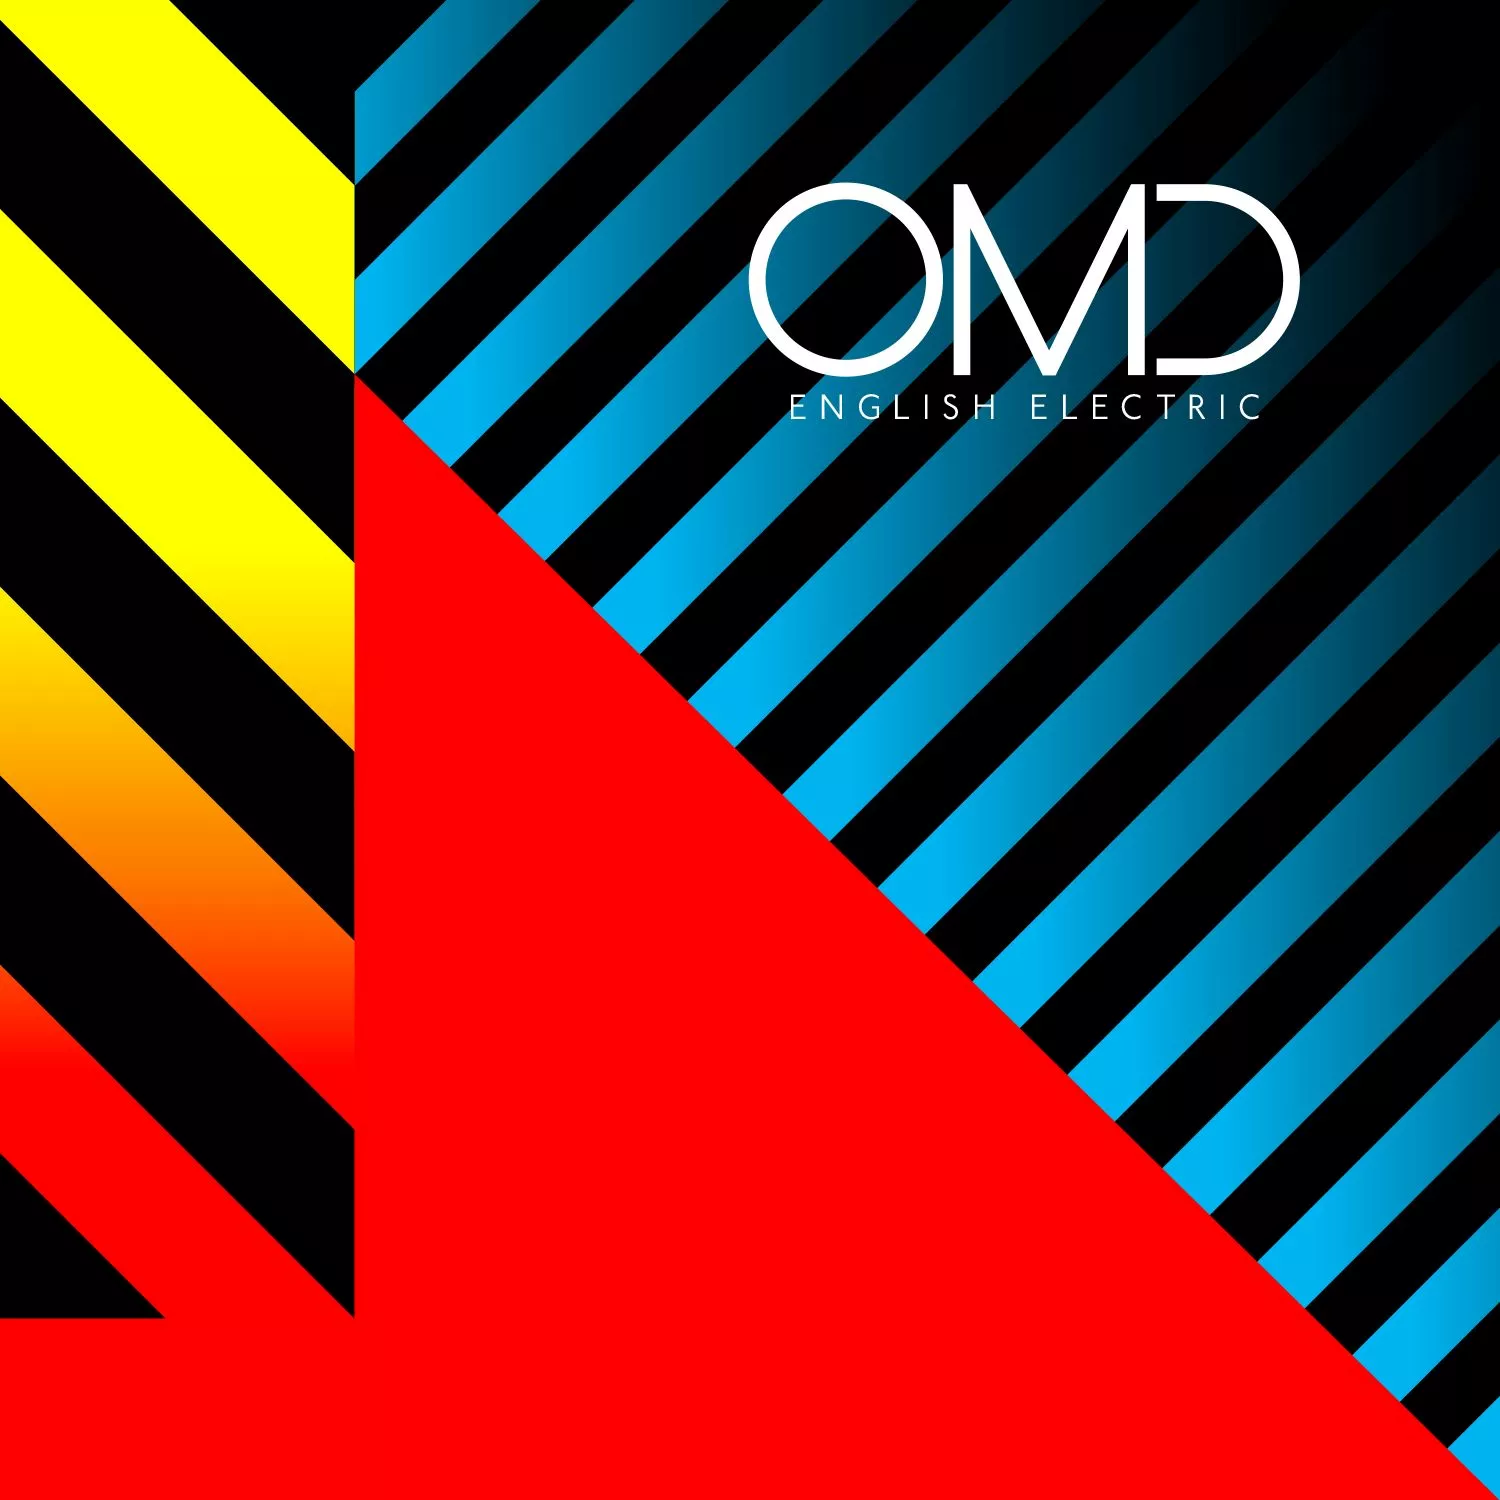 English Electric - Orchestral Manoeuvres In The Dark